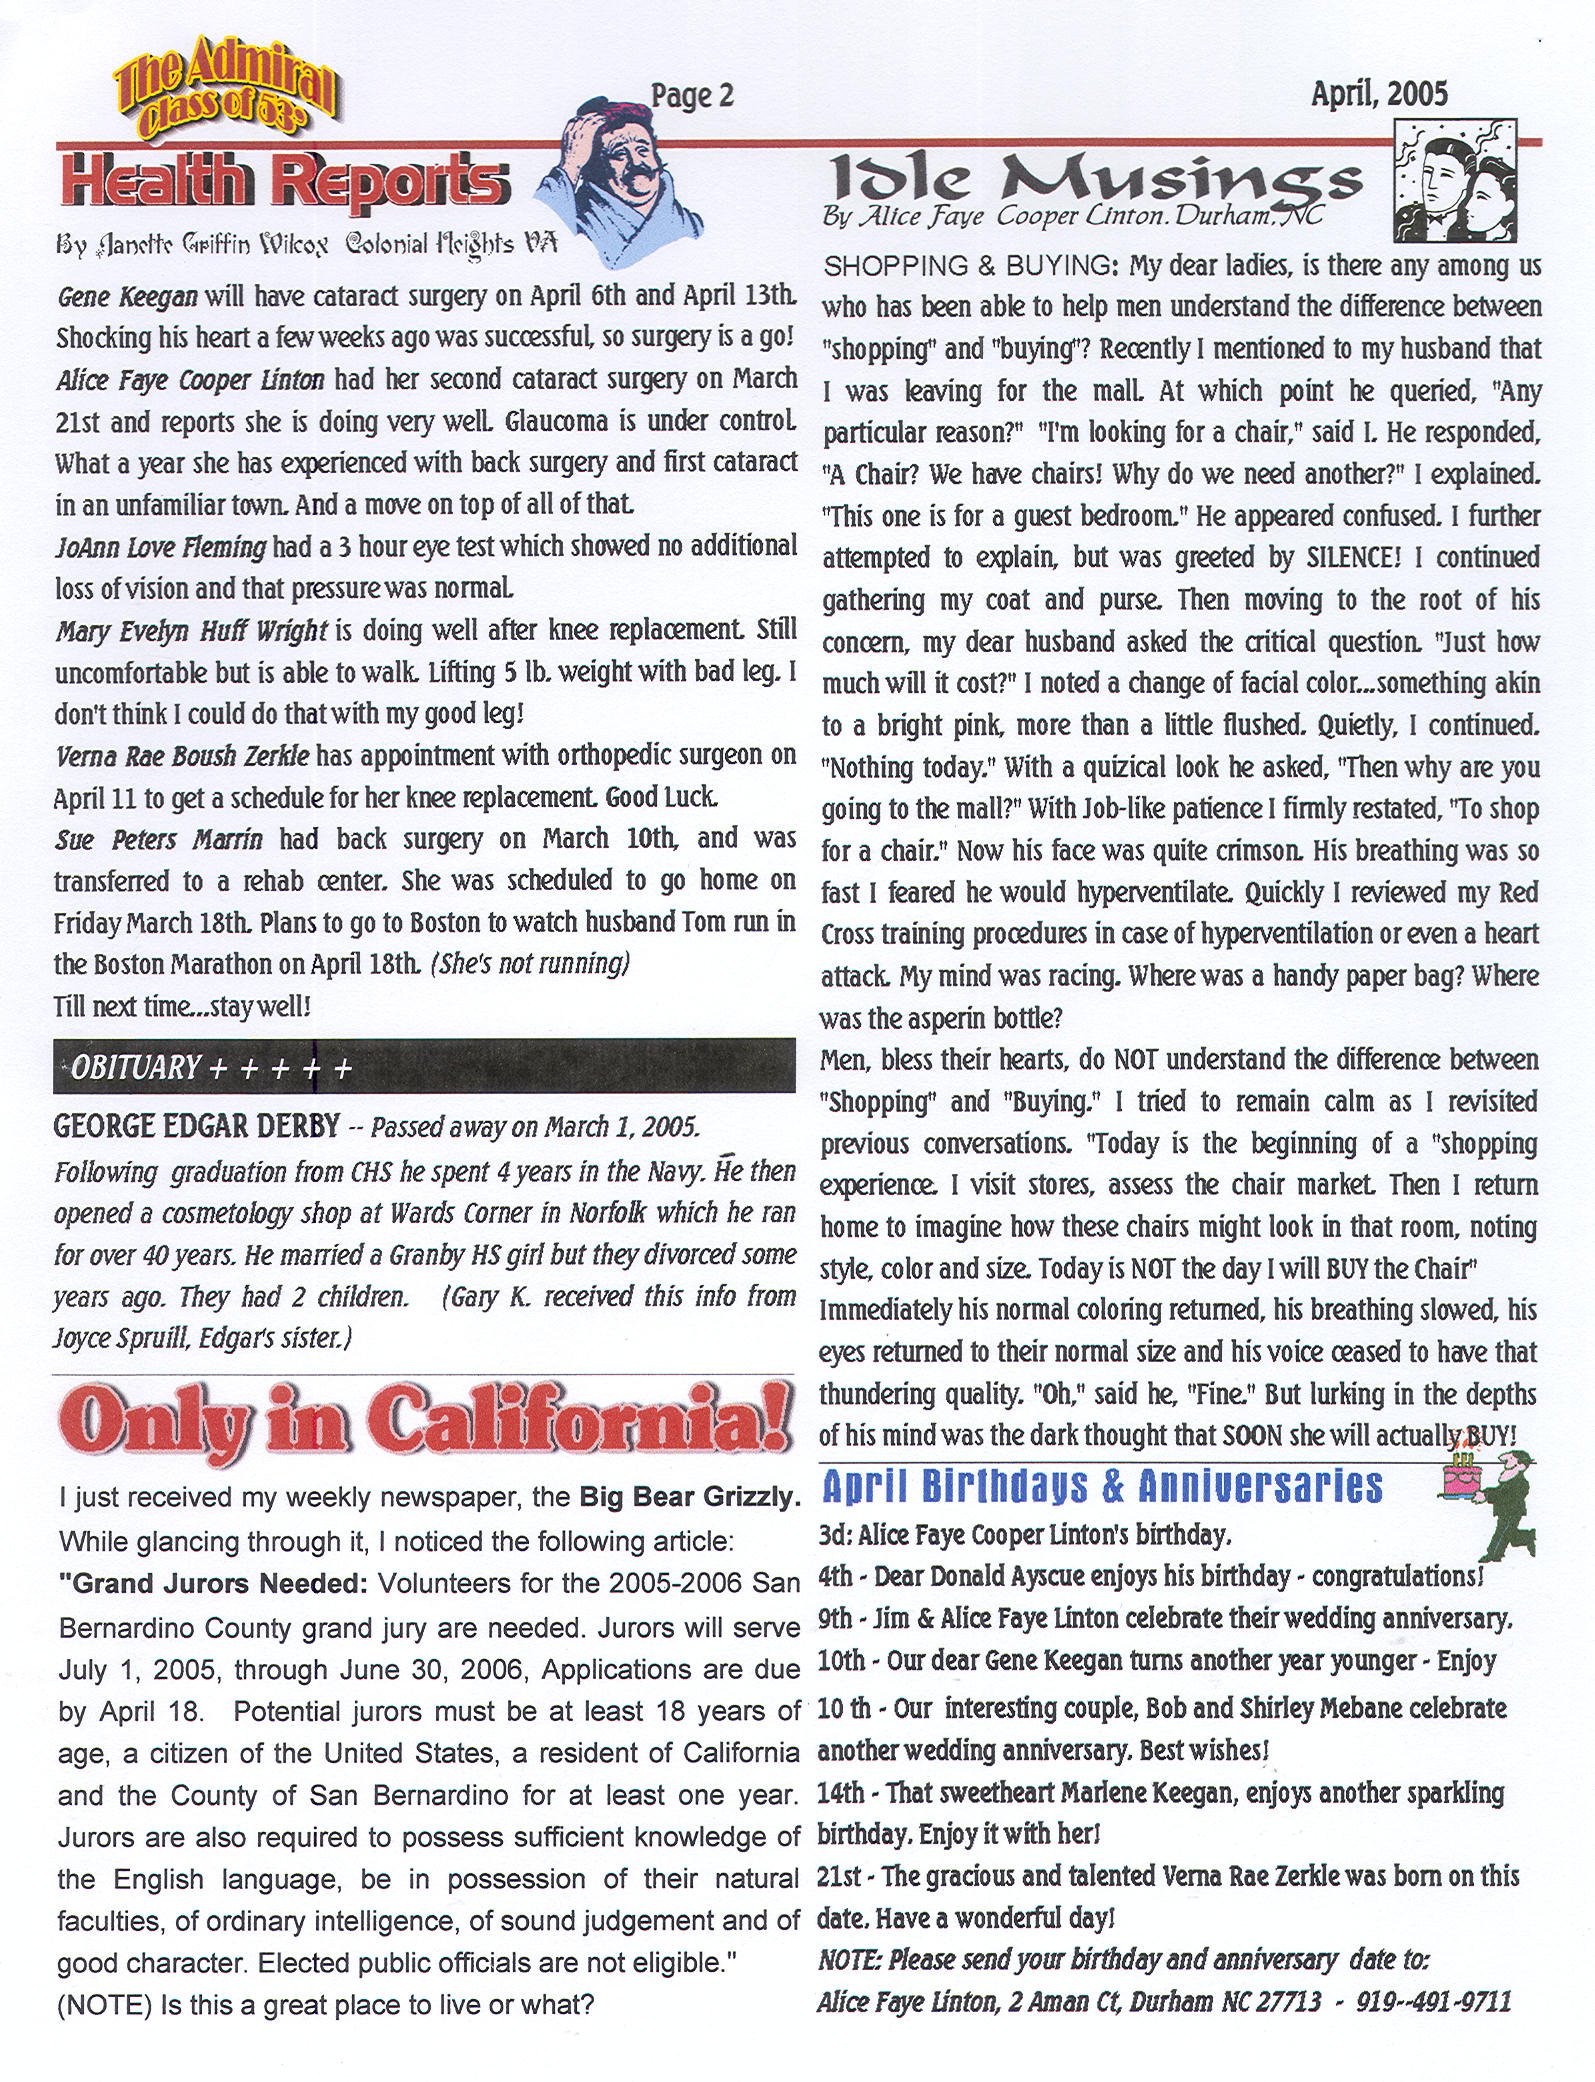 The Admiral - April 2005 - pg. 2